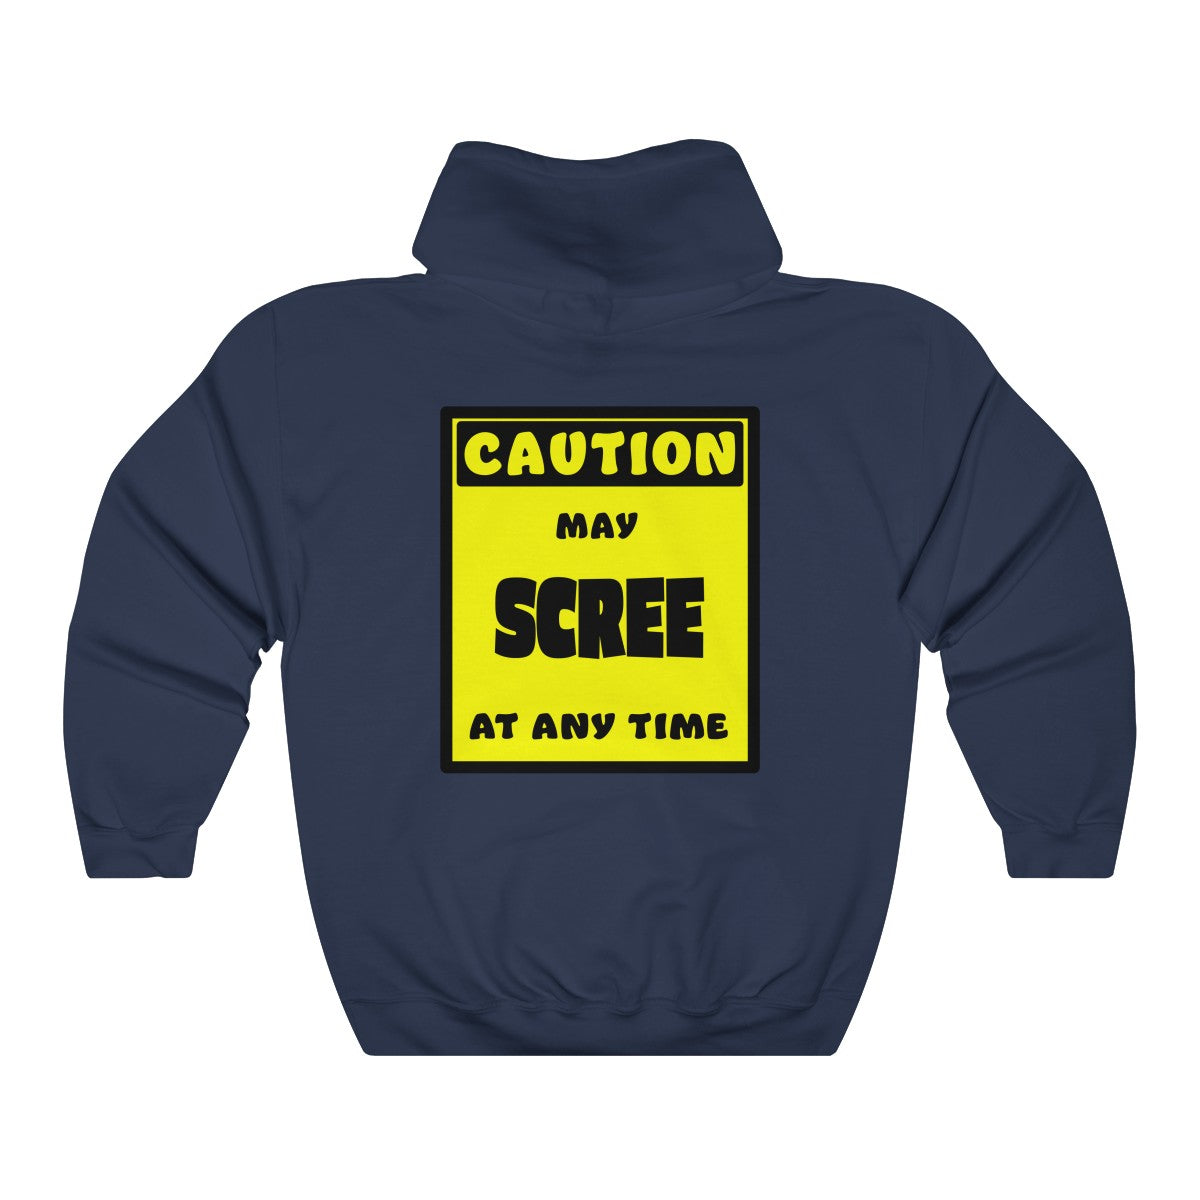 CAUTION! May SCREE at any time! - Hoodie Hoodie AFLT-Whootorca Navy Blue S 